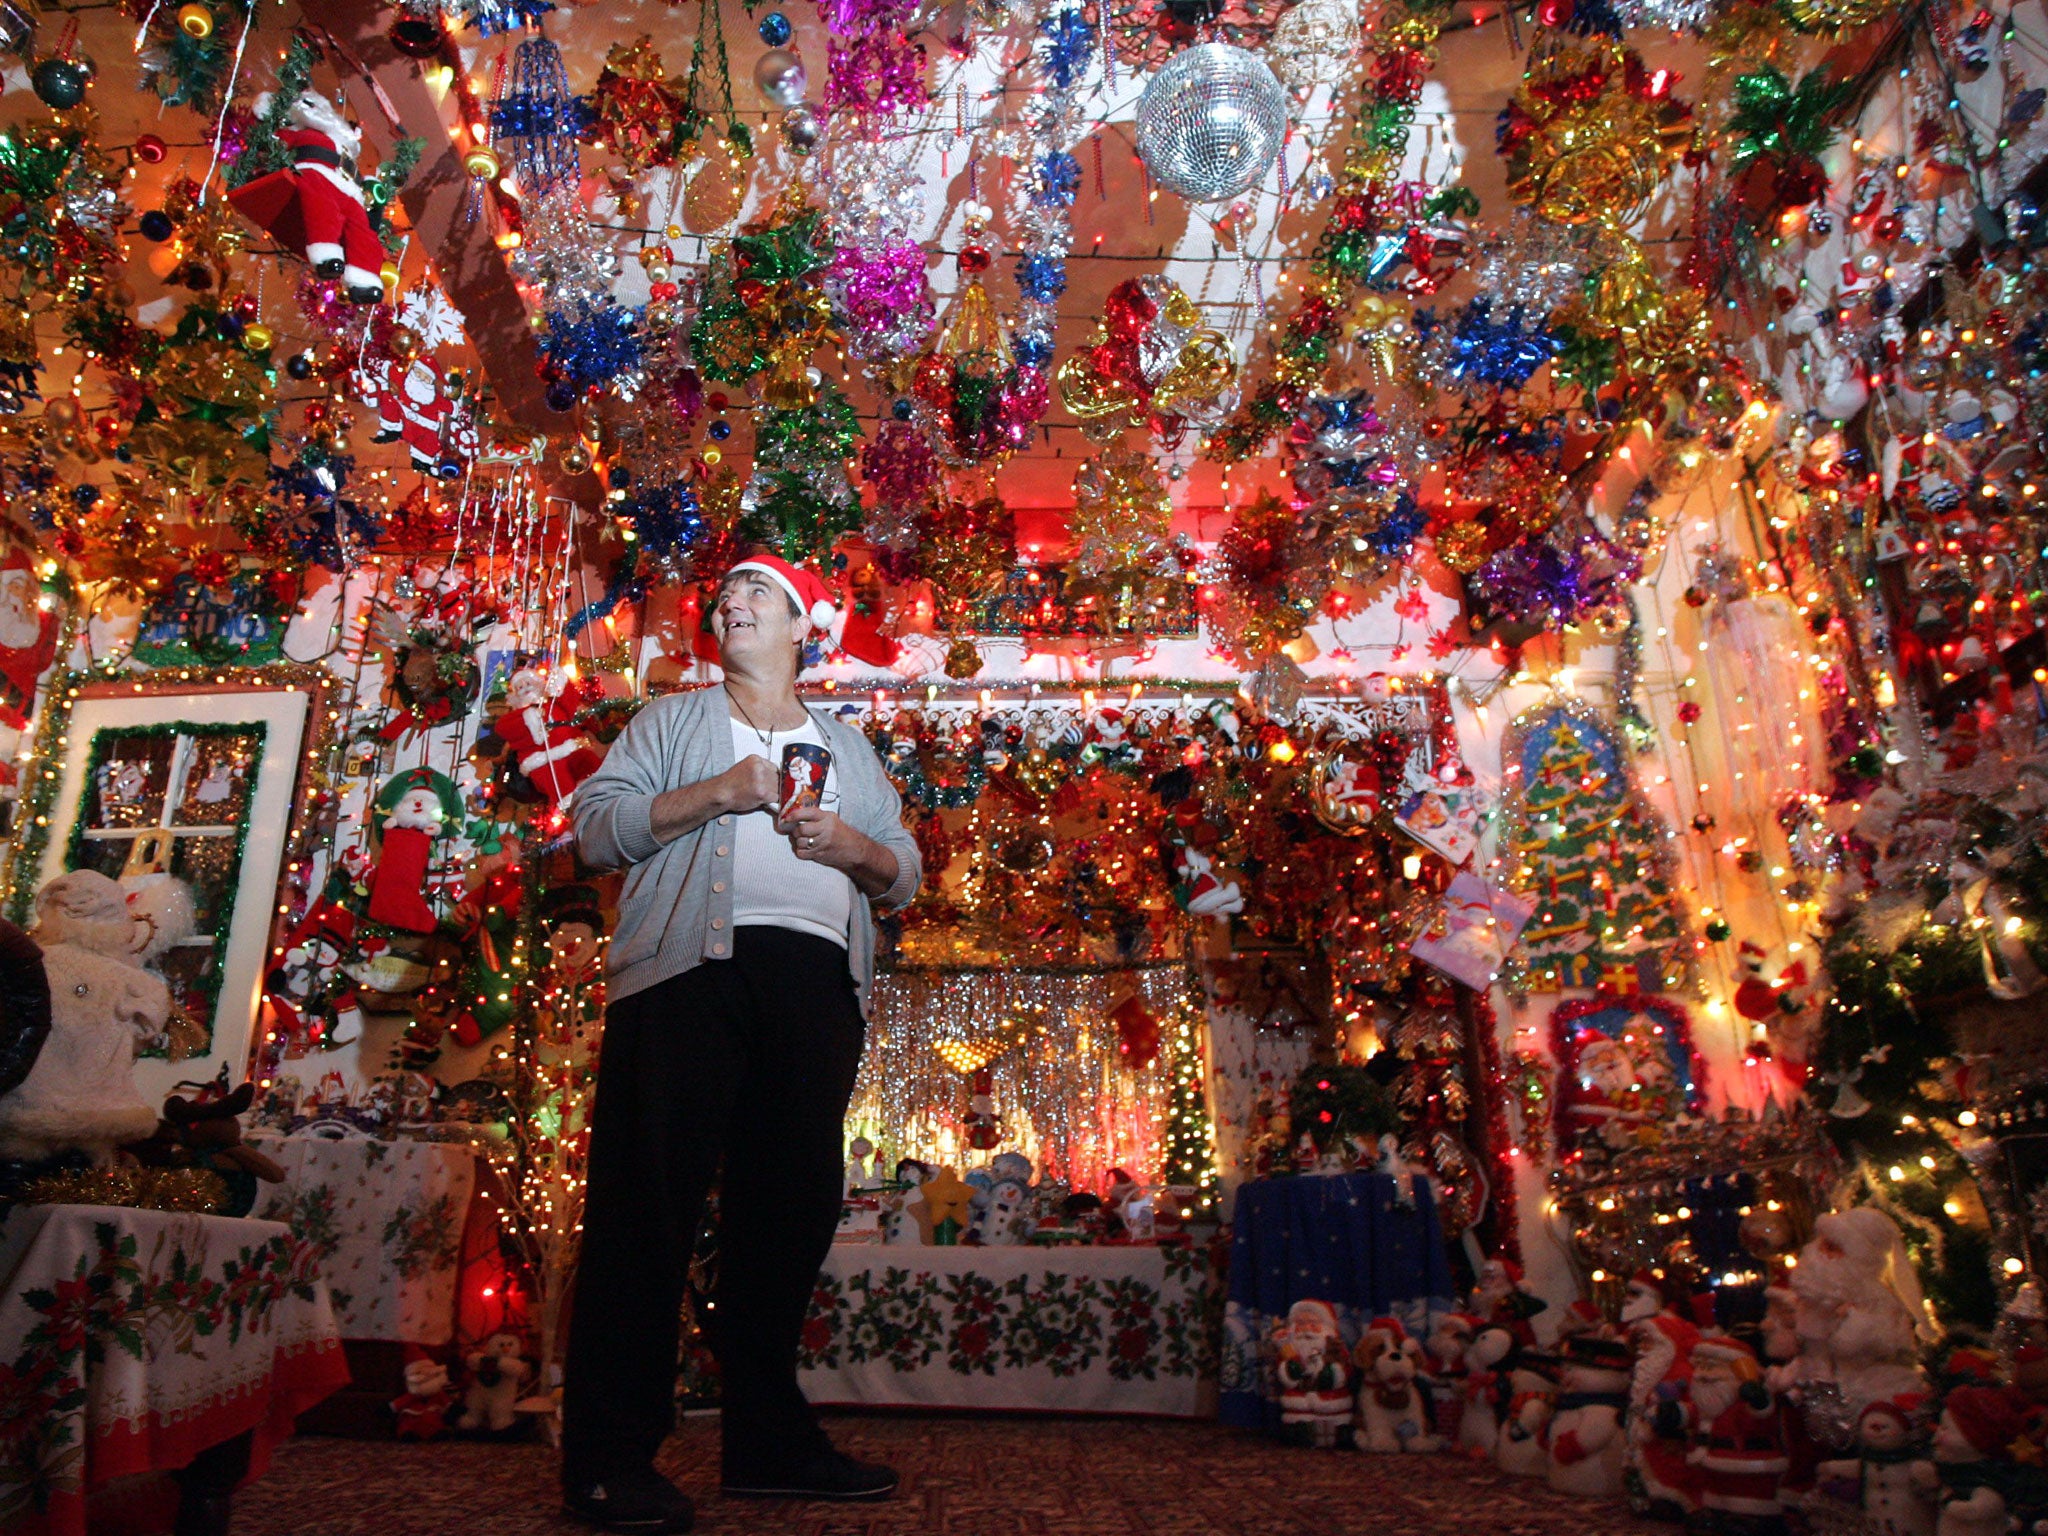 Bernard Lumsden poses inside his house, illuminated by Christmas decorations on December 16, 2005 in Bristol, England.